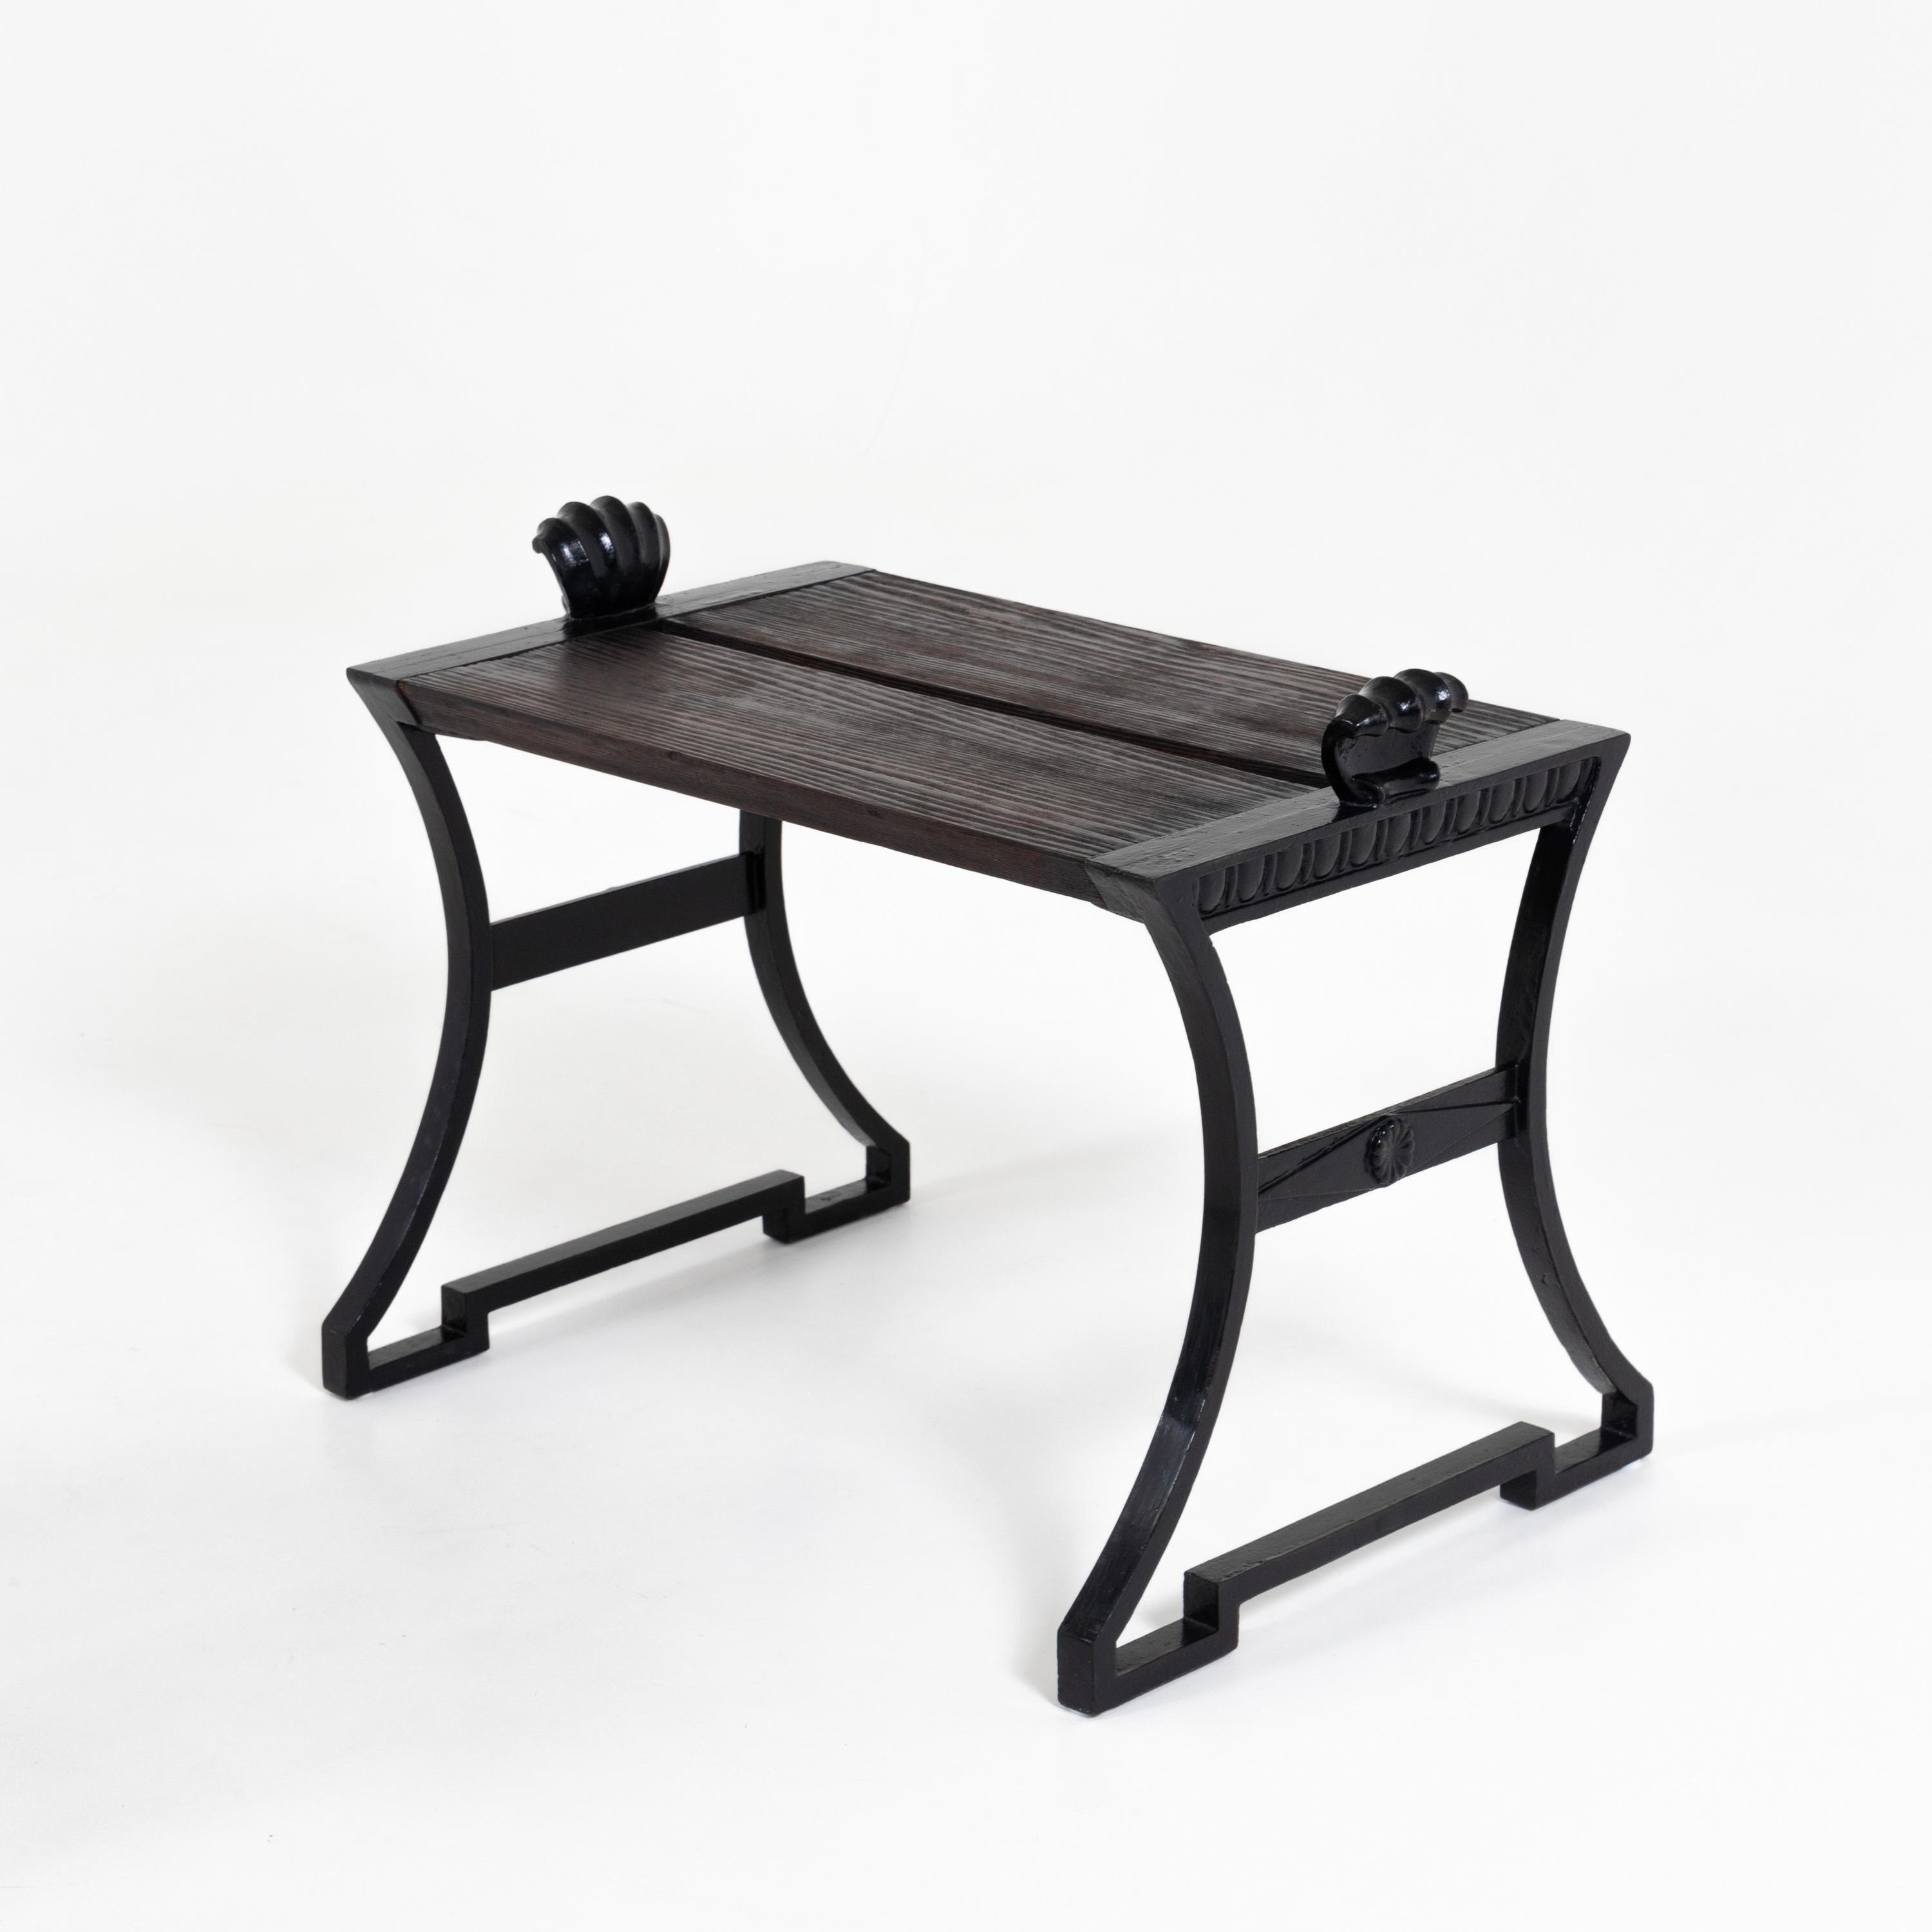 Pair of Folke Bensow (1886-1971) stools in black lacquered iron by the Näfveqvarn foundry and dark stained wood. Provenance: Ex collection Karl Lagerfeld.